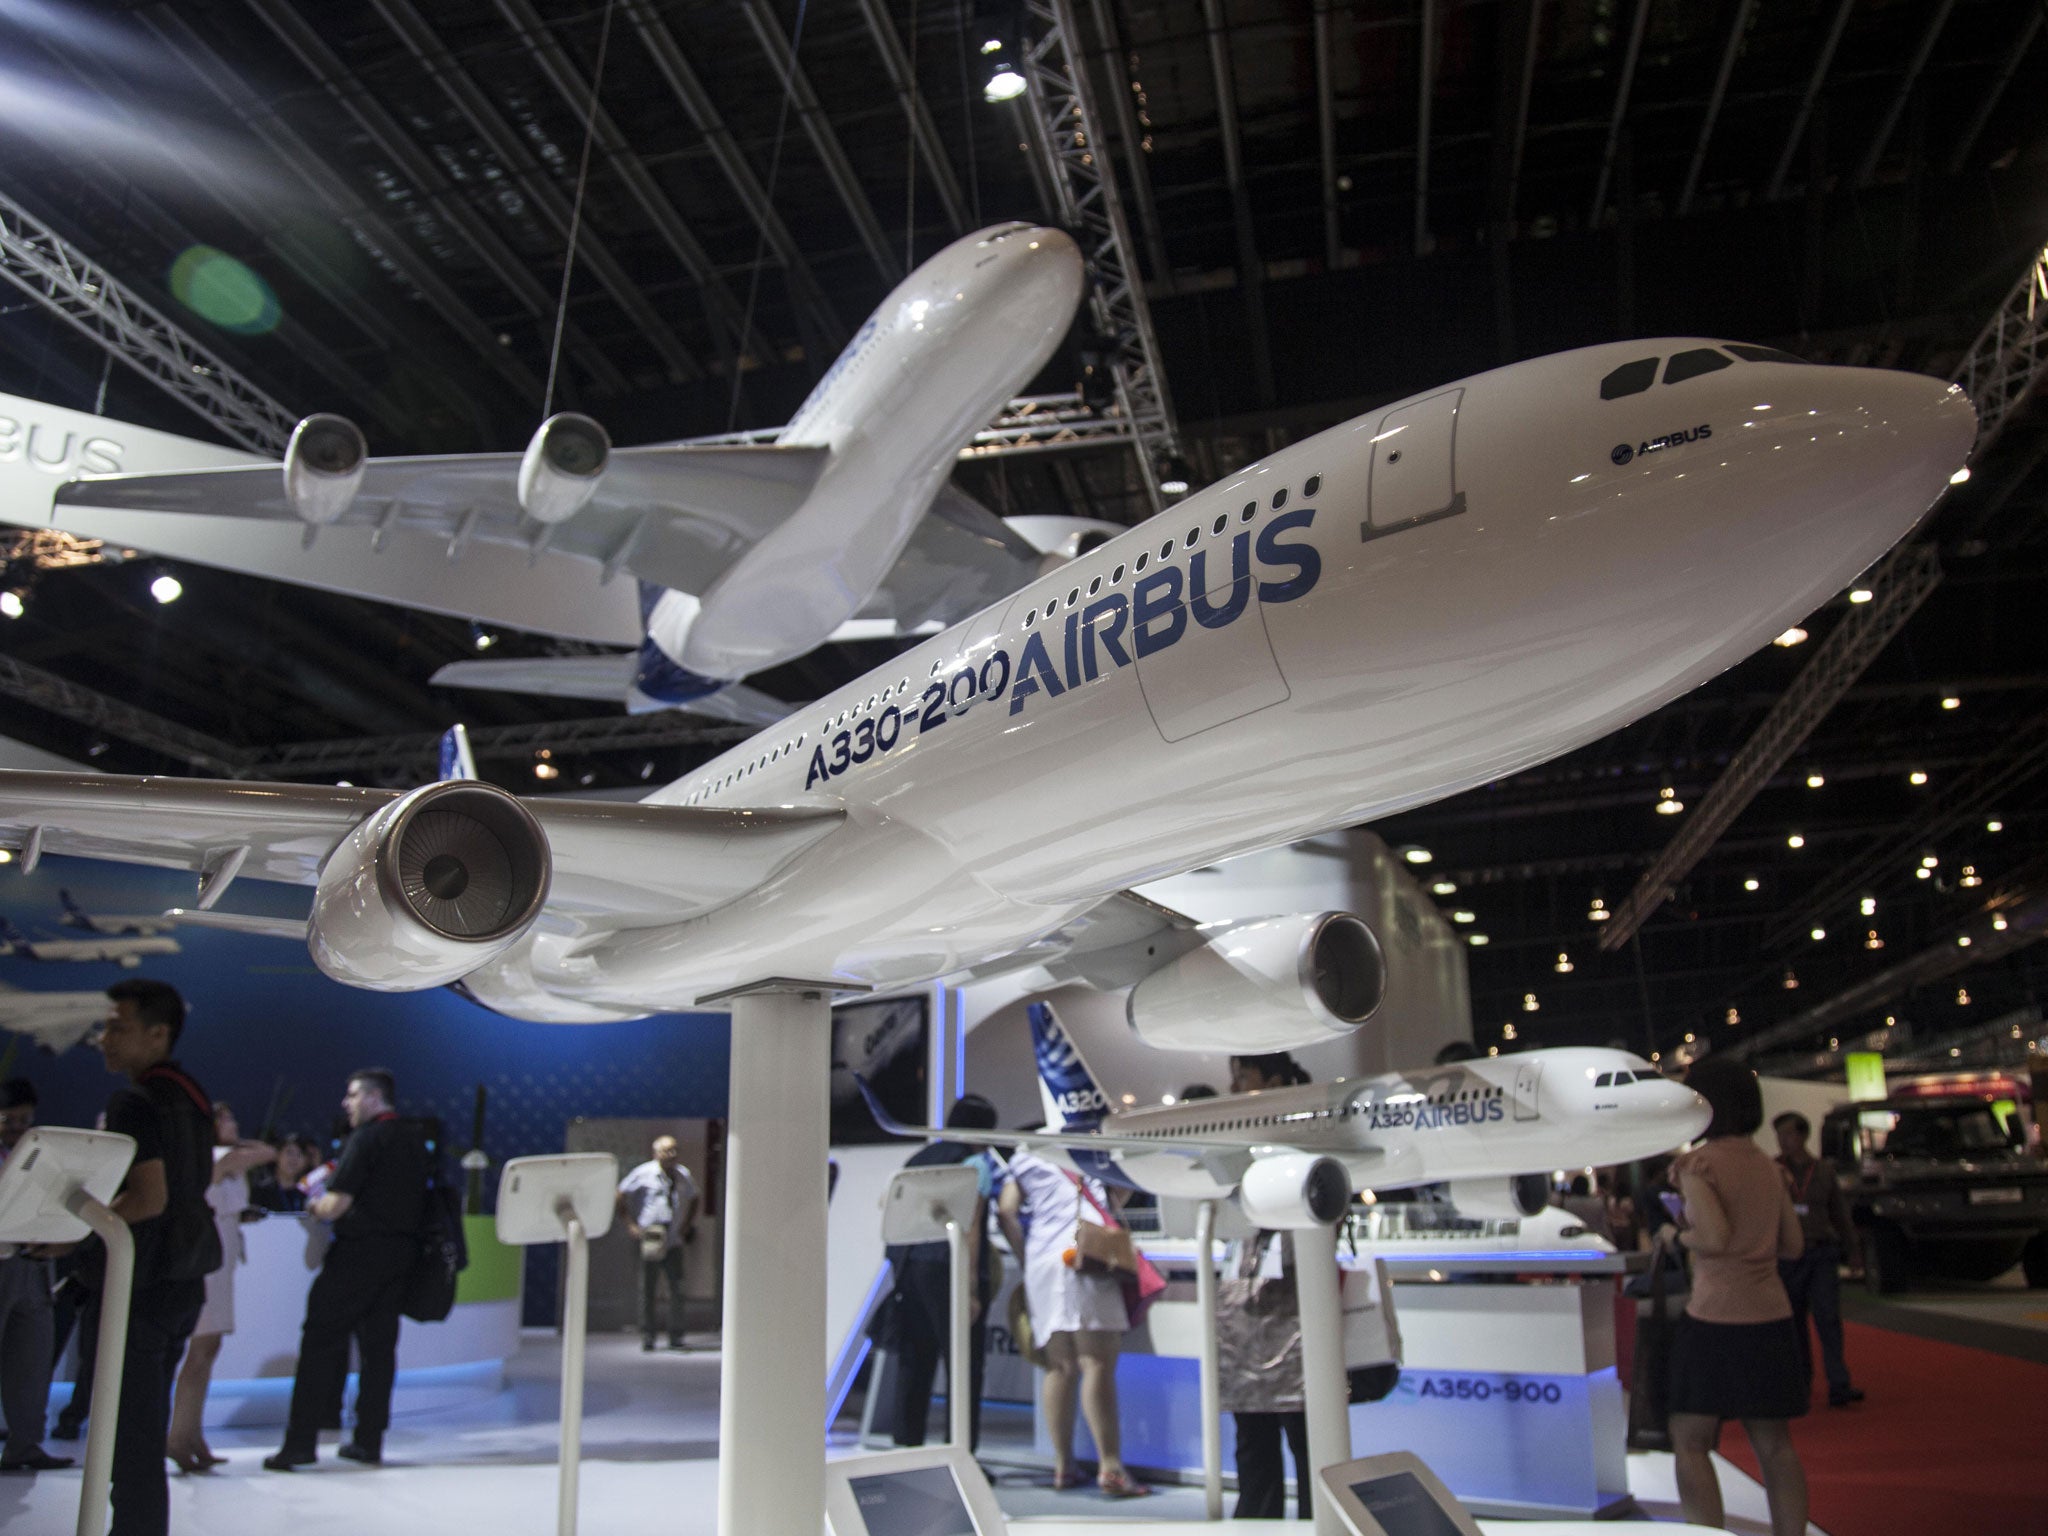 Airbus managed to secure the top sales spot thanks to a surge in orders in December